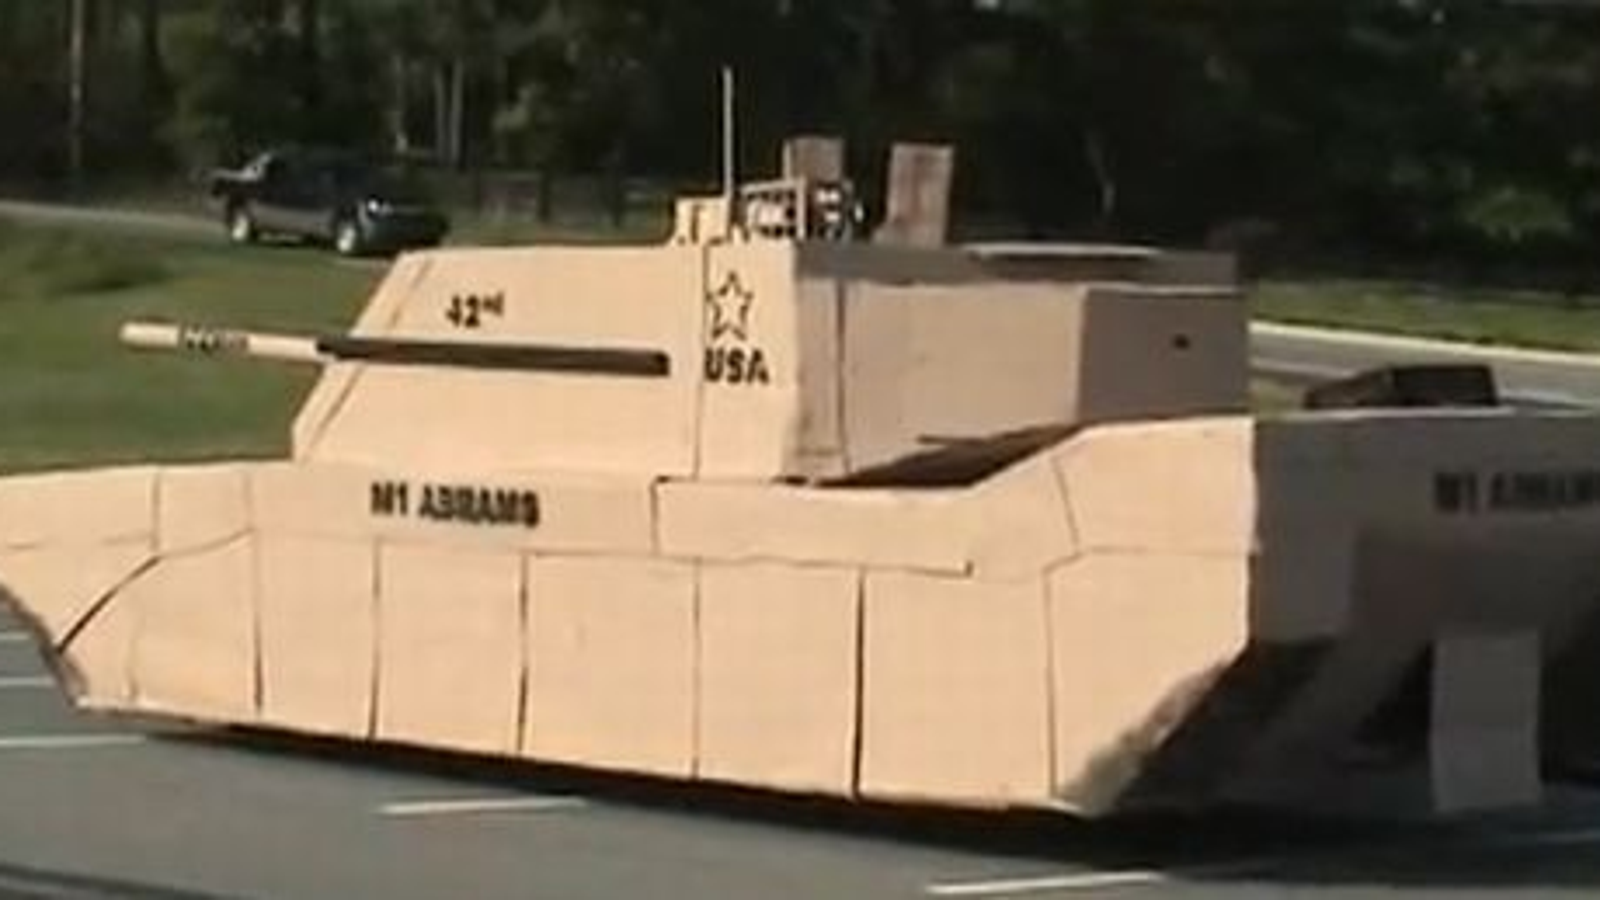 how to make a small military tank out of cardboard